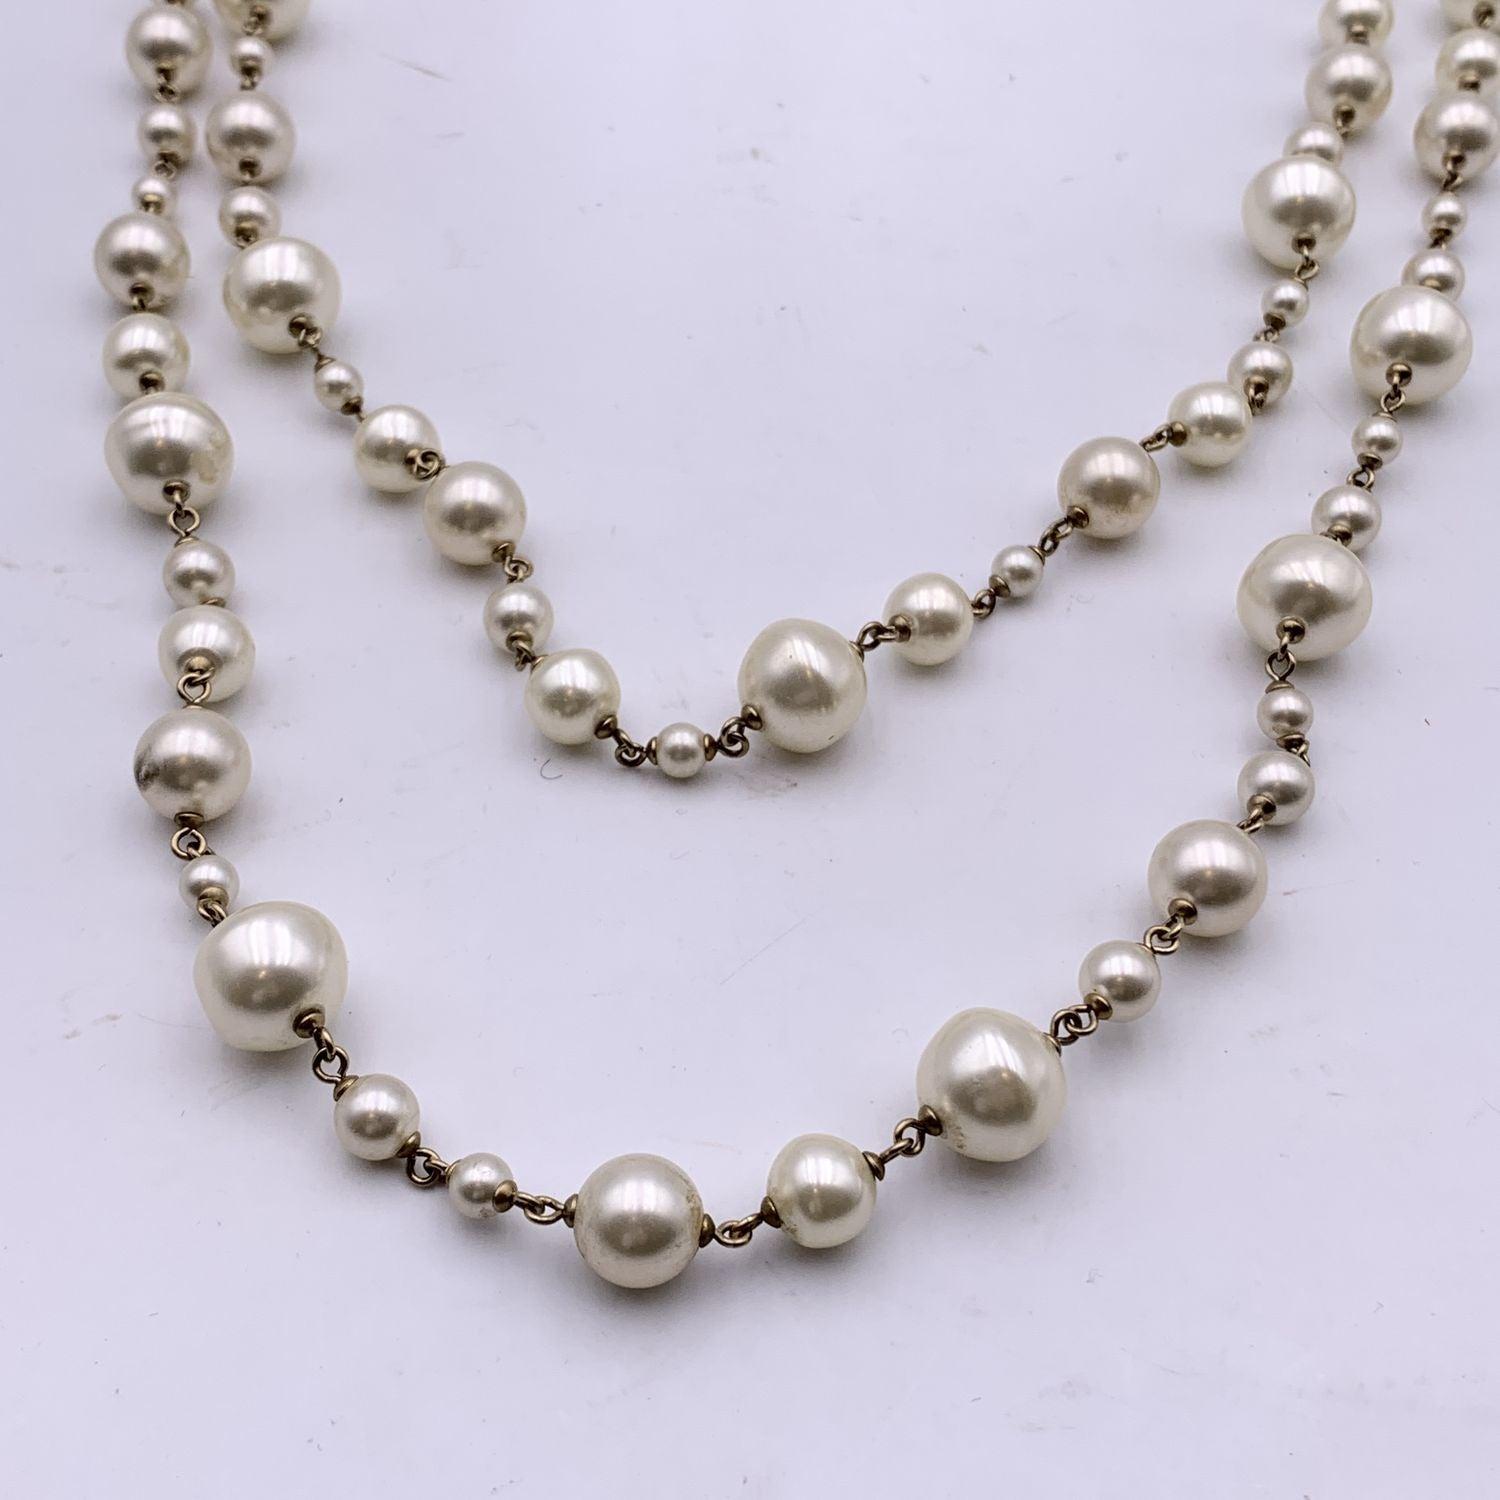 Chanel Long Double Strand Faux Pearl Necklace with CC Logo For Sale 2